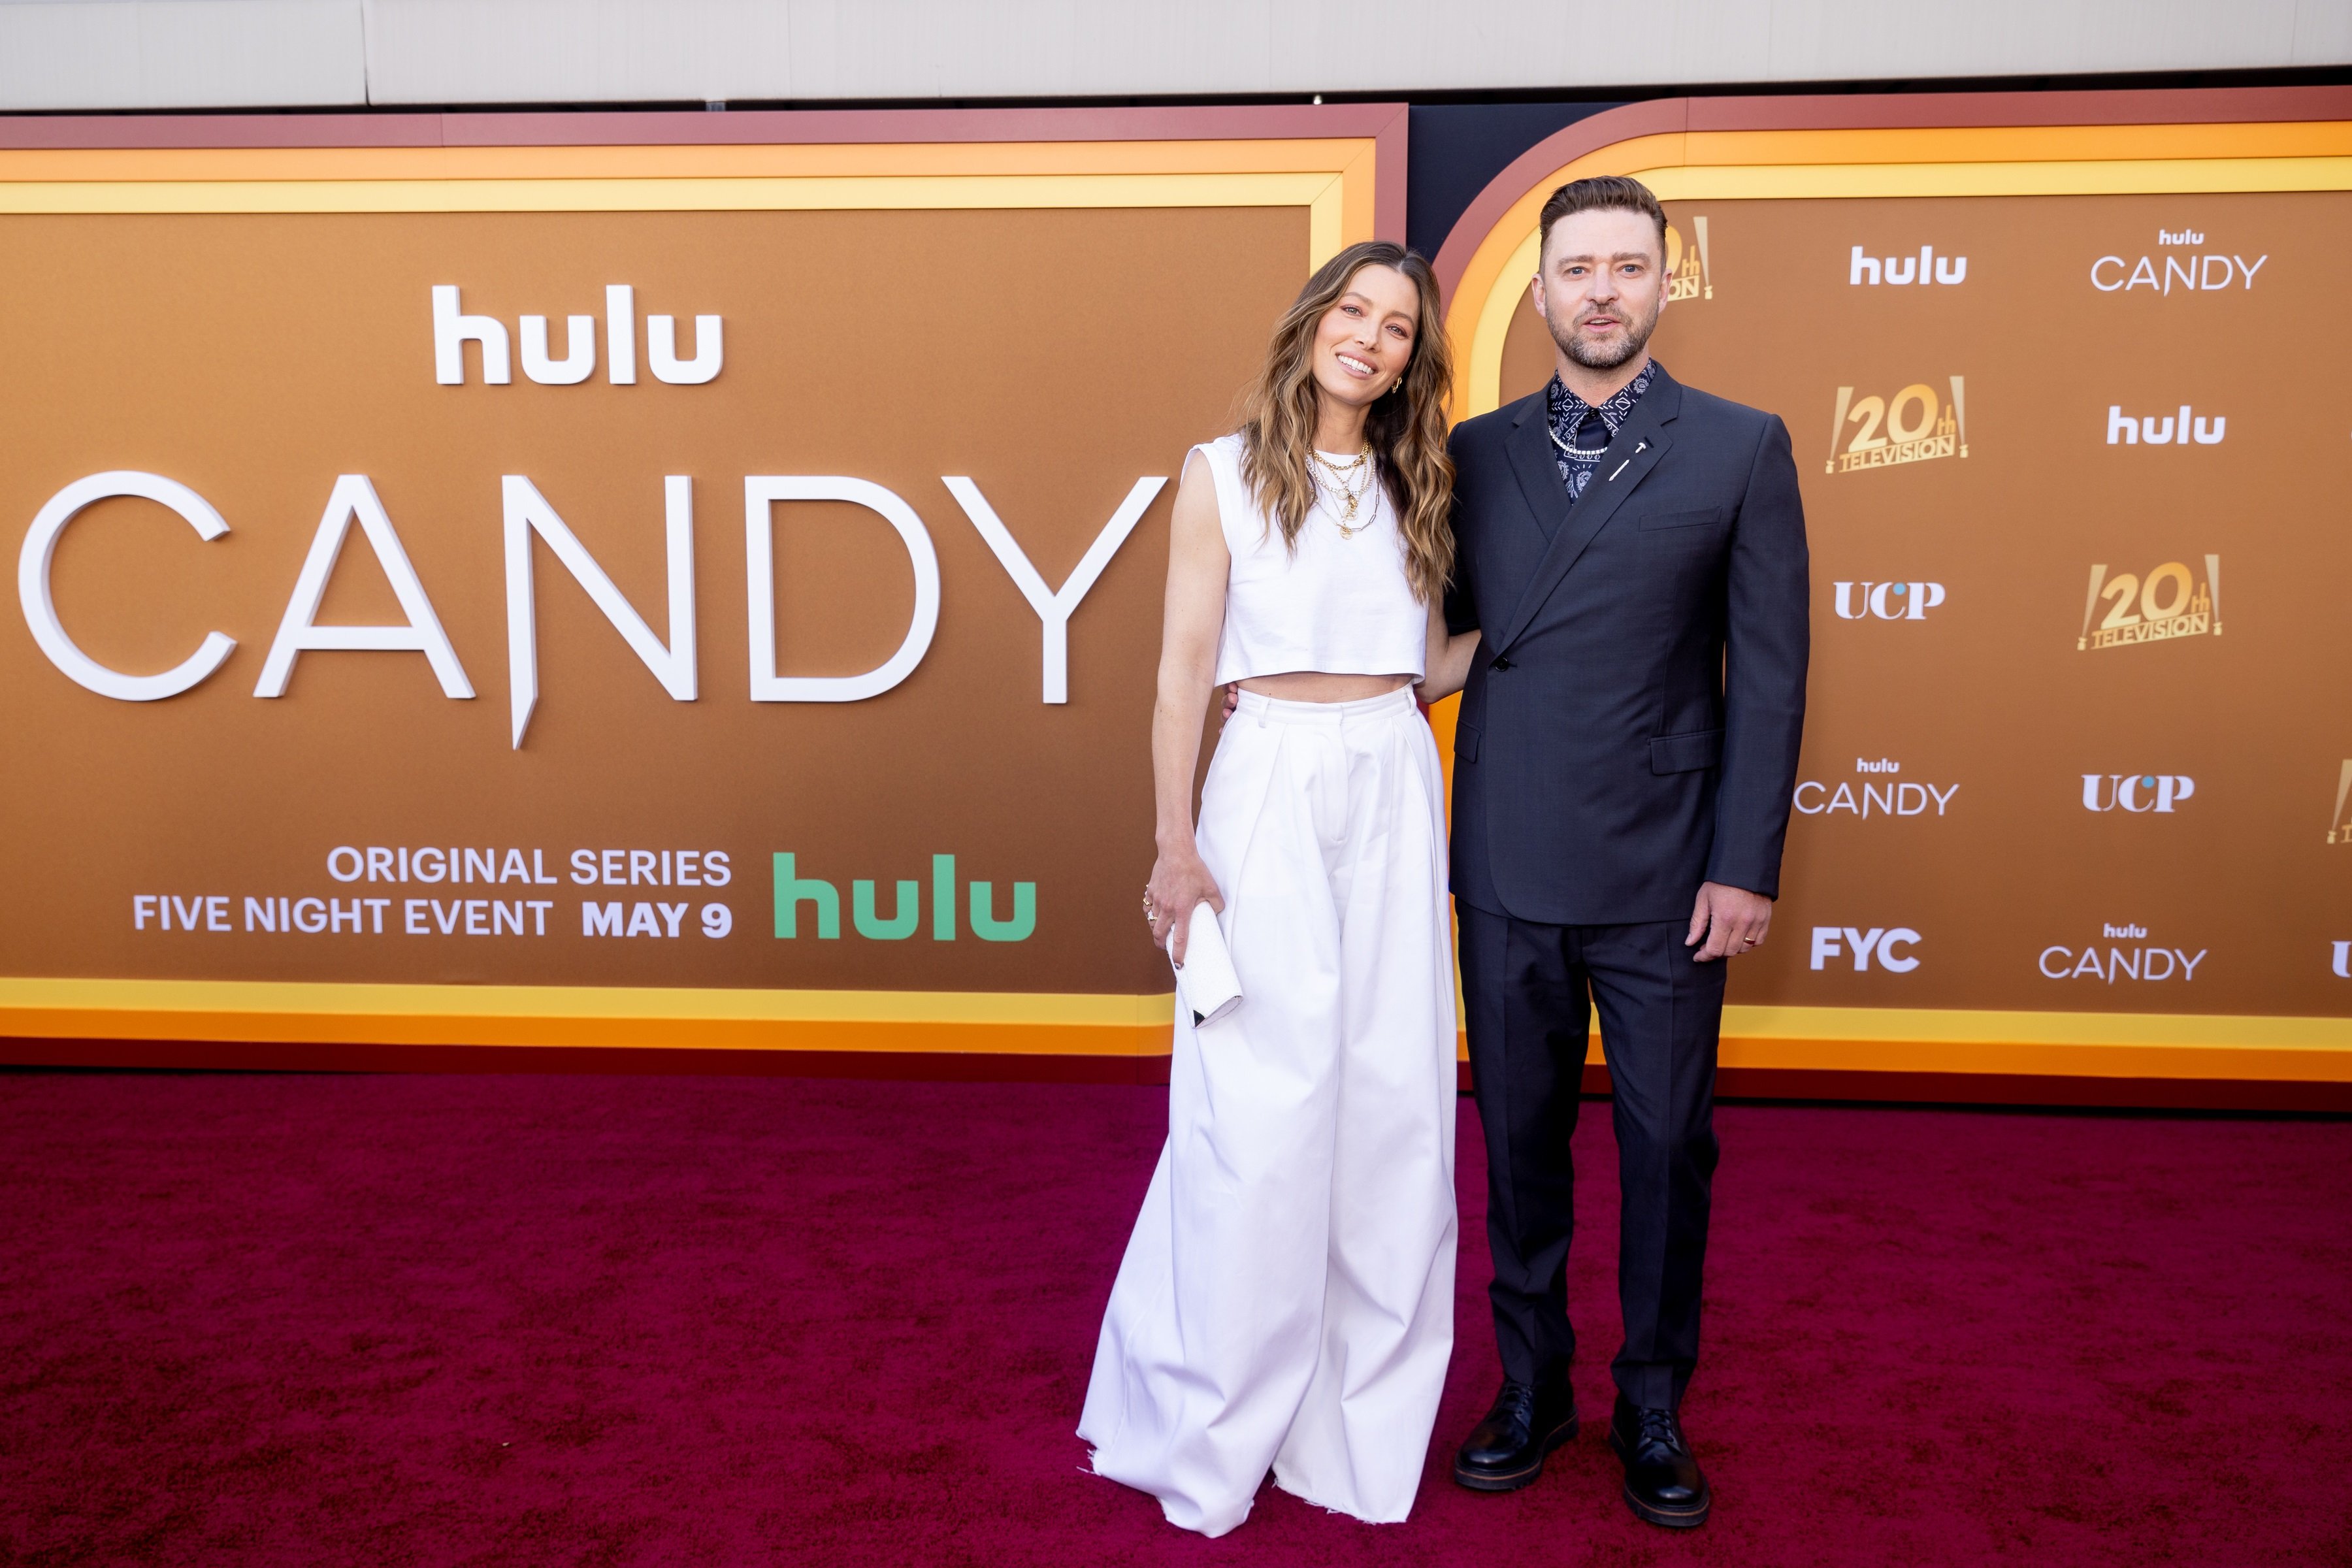 Jessica Biel and Justin Timberlake pose for photographers at the 'Candy' premiere